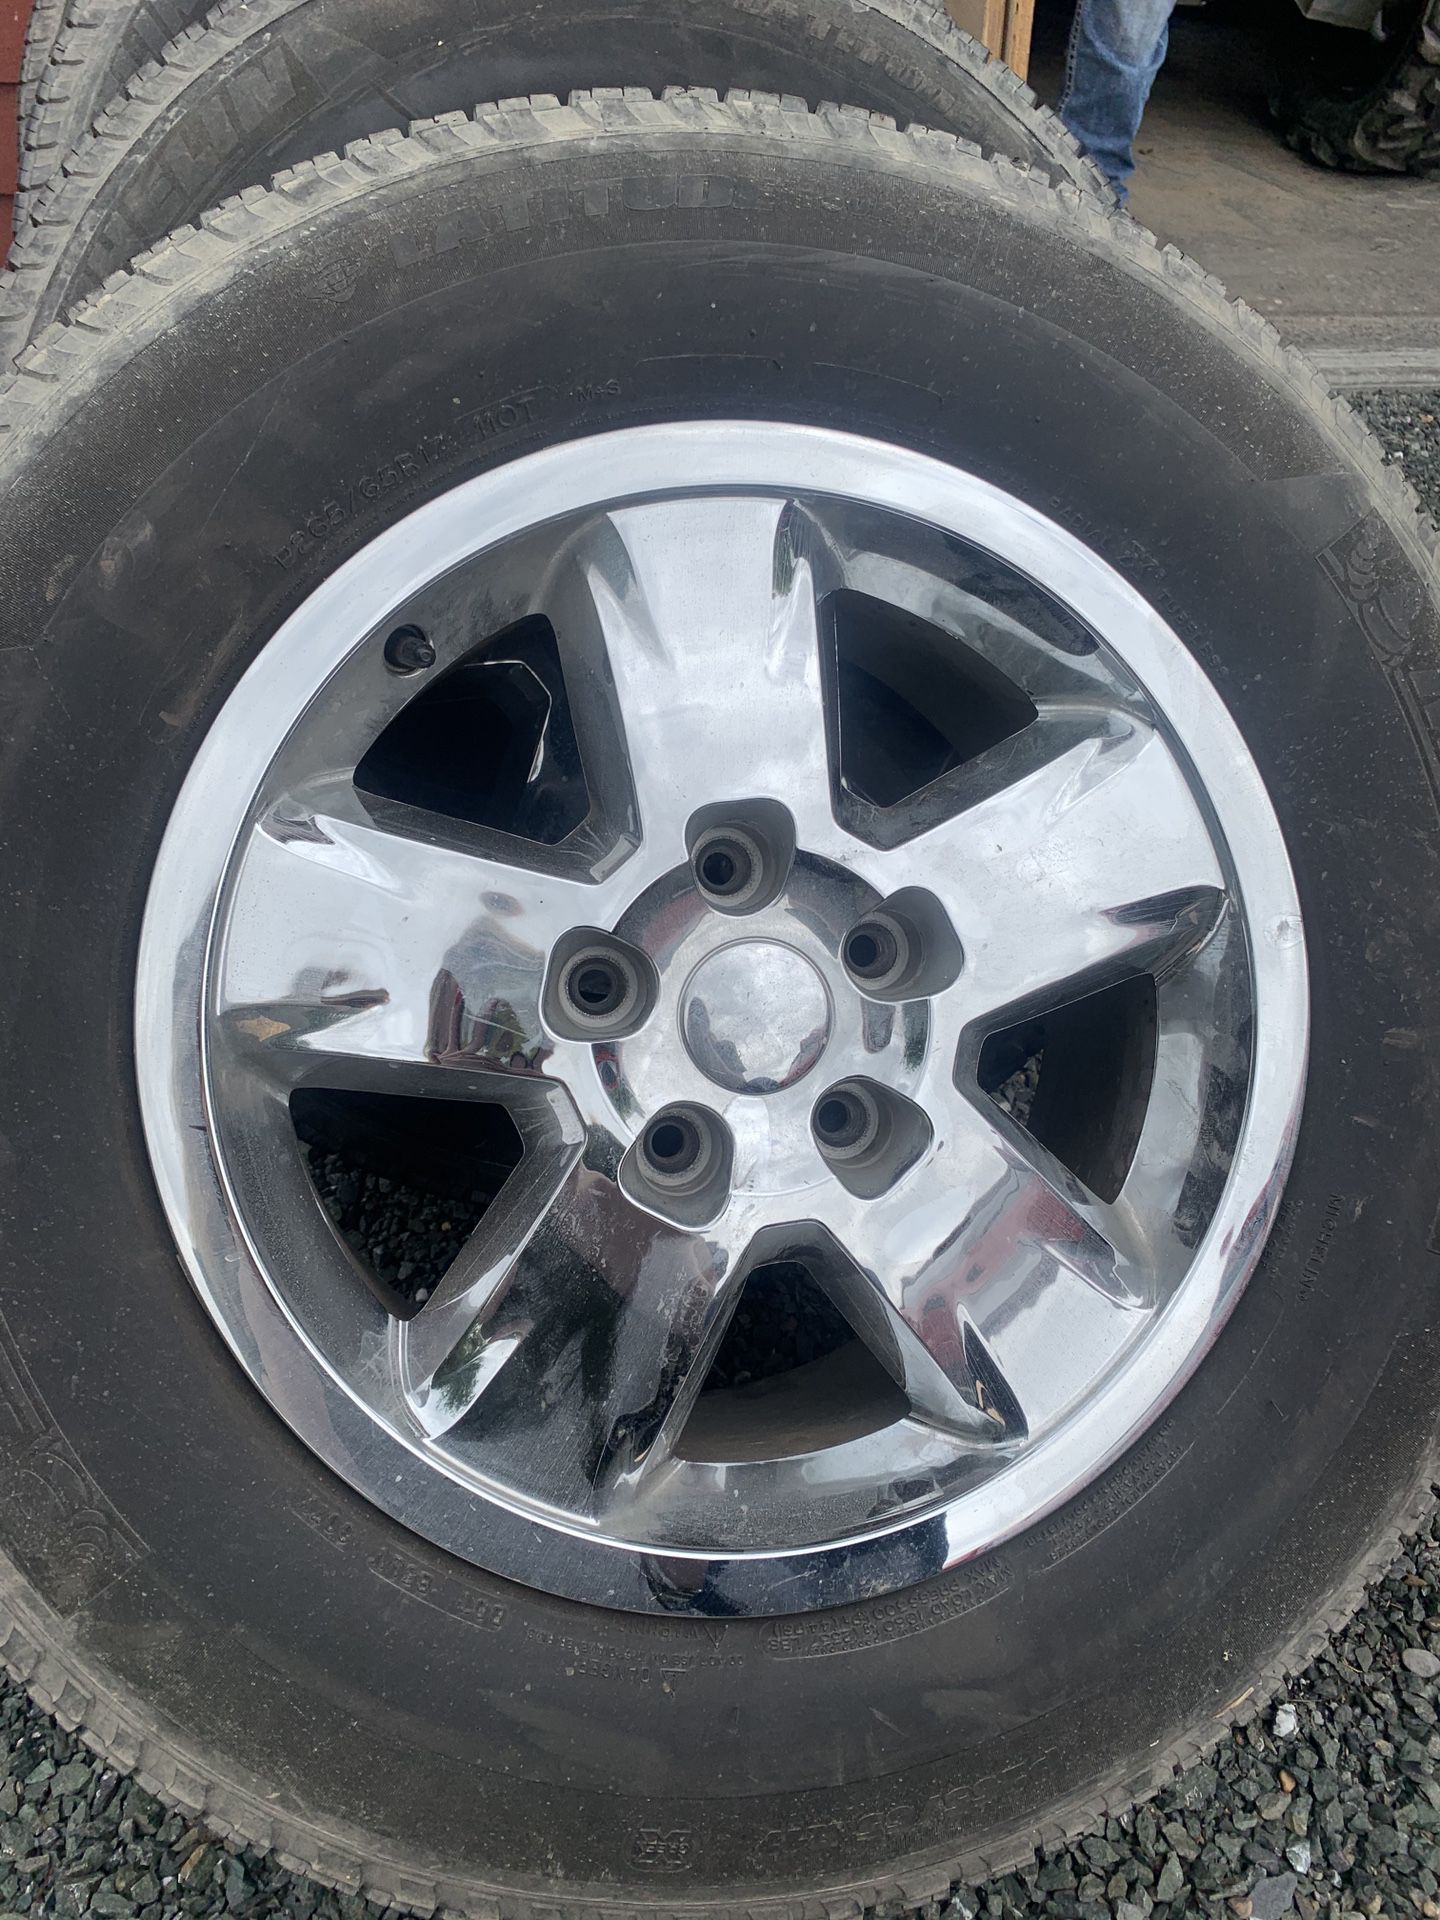 2011 Jeep Grand Cherokee rims and tires